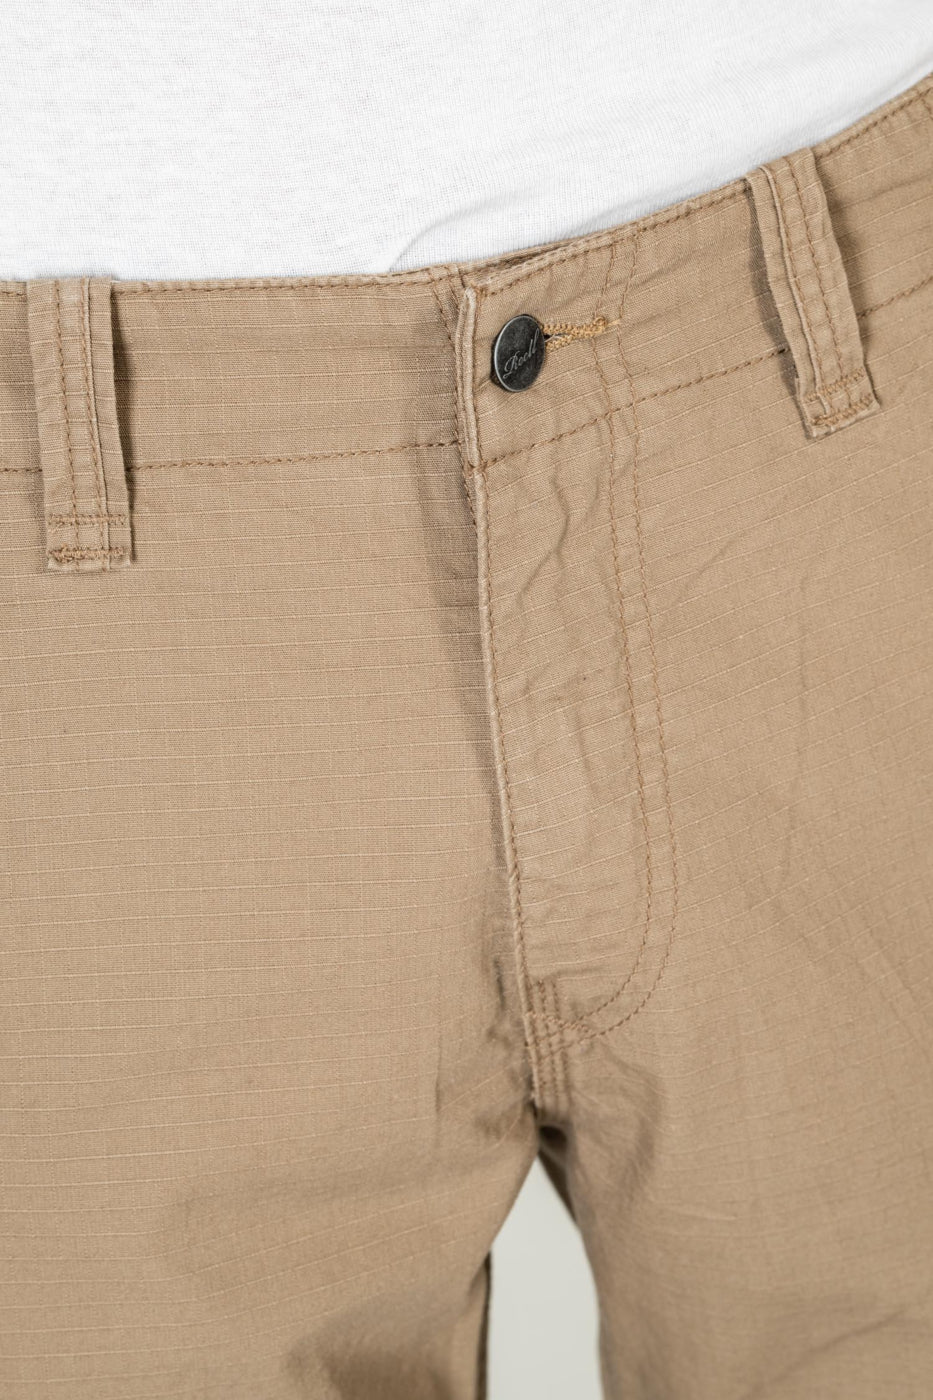 Reell Ripstop Cargo Hose - Taupe